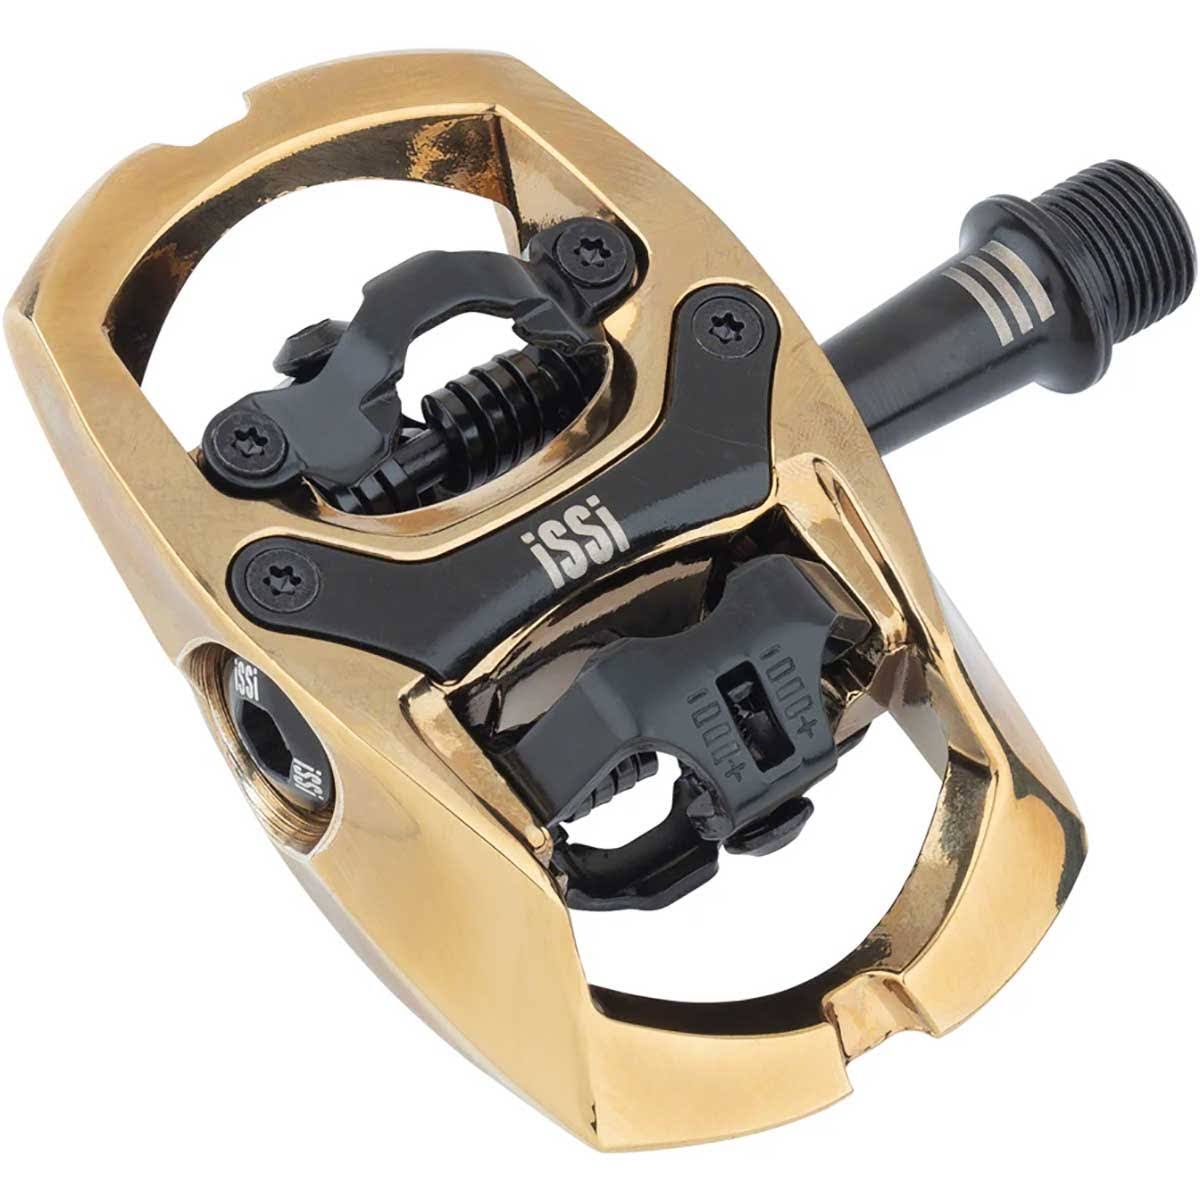 ISSI Trail III Pedals - Dual Sided Clipless with Platform, Aluminum, 9/16" Bullion Gold 2020